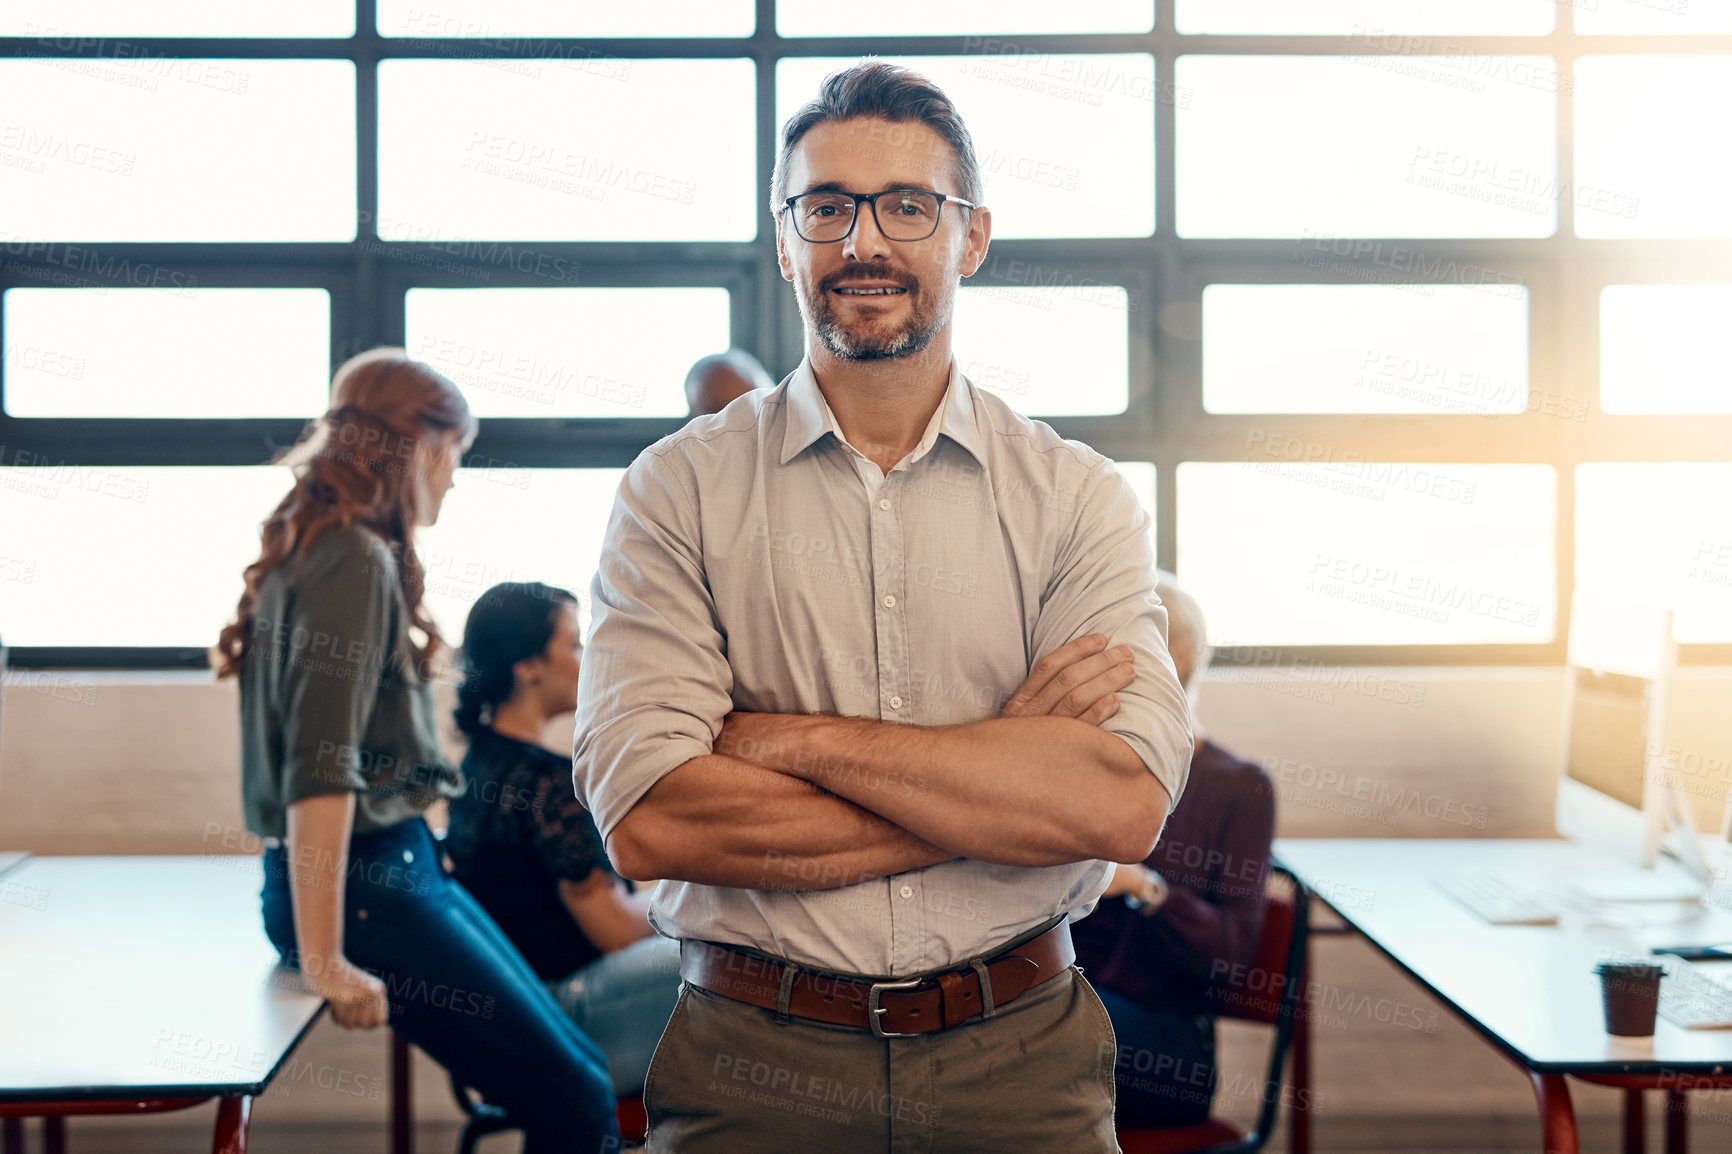 Buy stock photo Portrait of a confident mature businessman standing in a modern office with his colleagues in the background